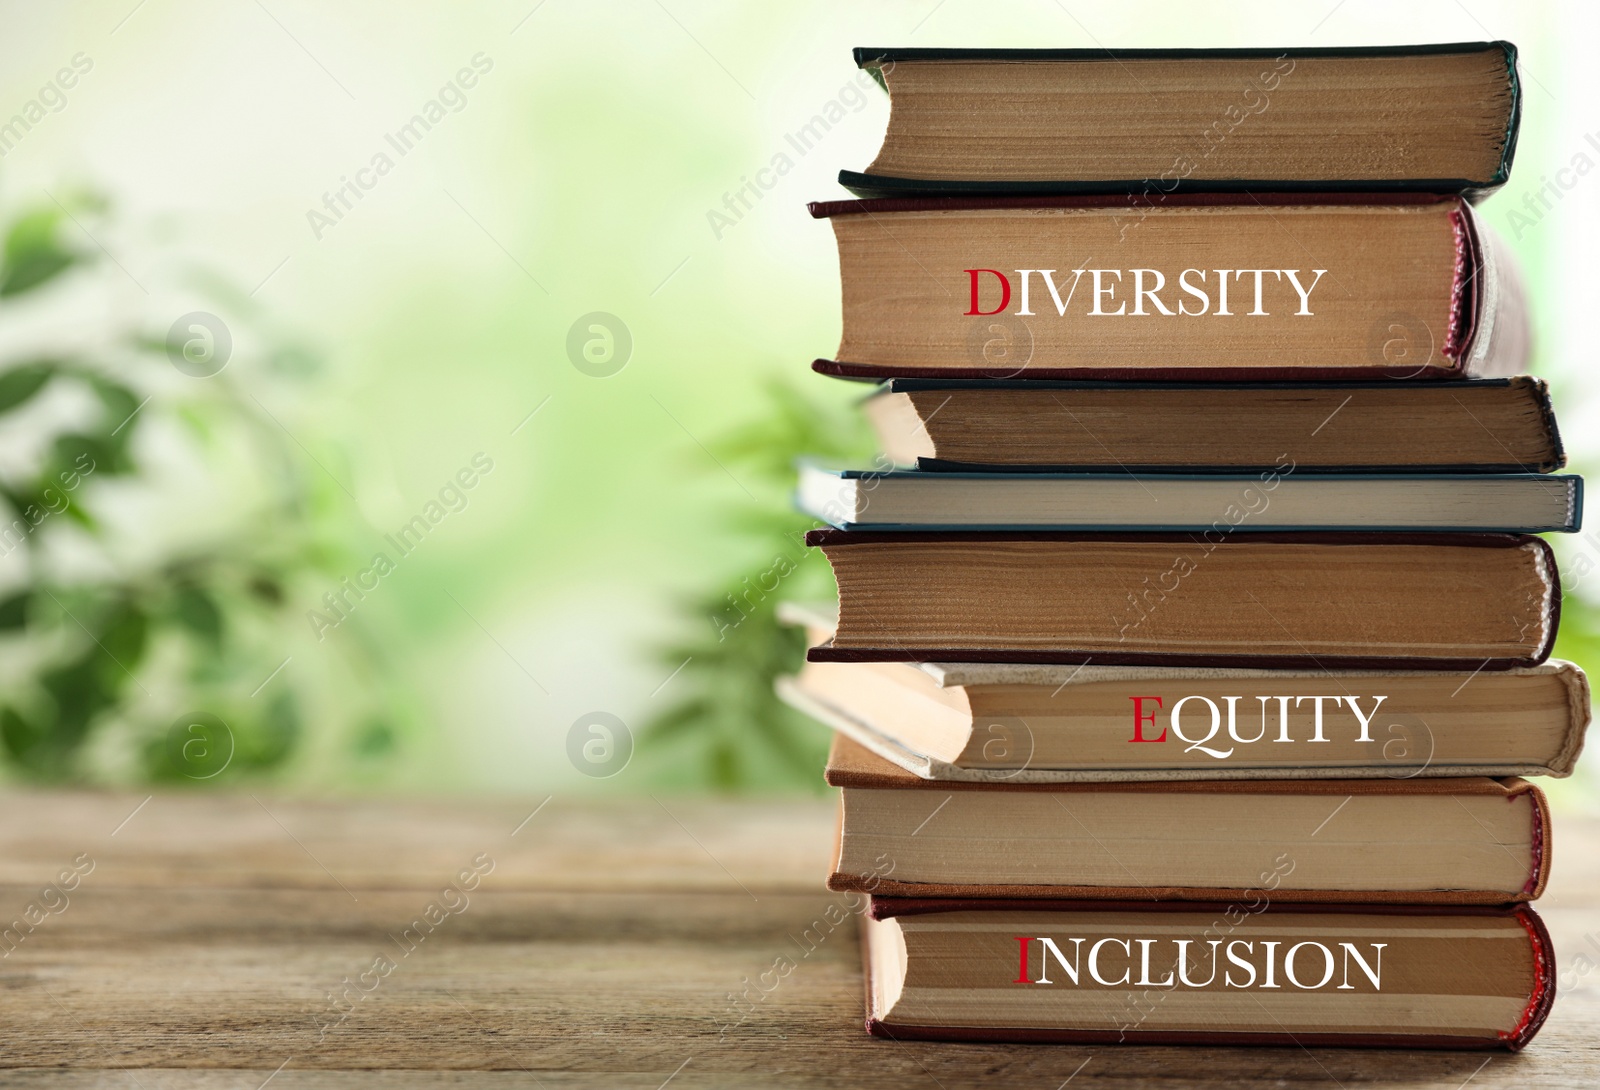 Image of Stack of hardcover books with words Diversity, Equity, Inclusion on wooden table outdoors. Space for text